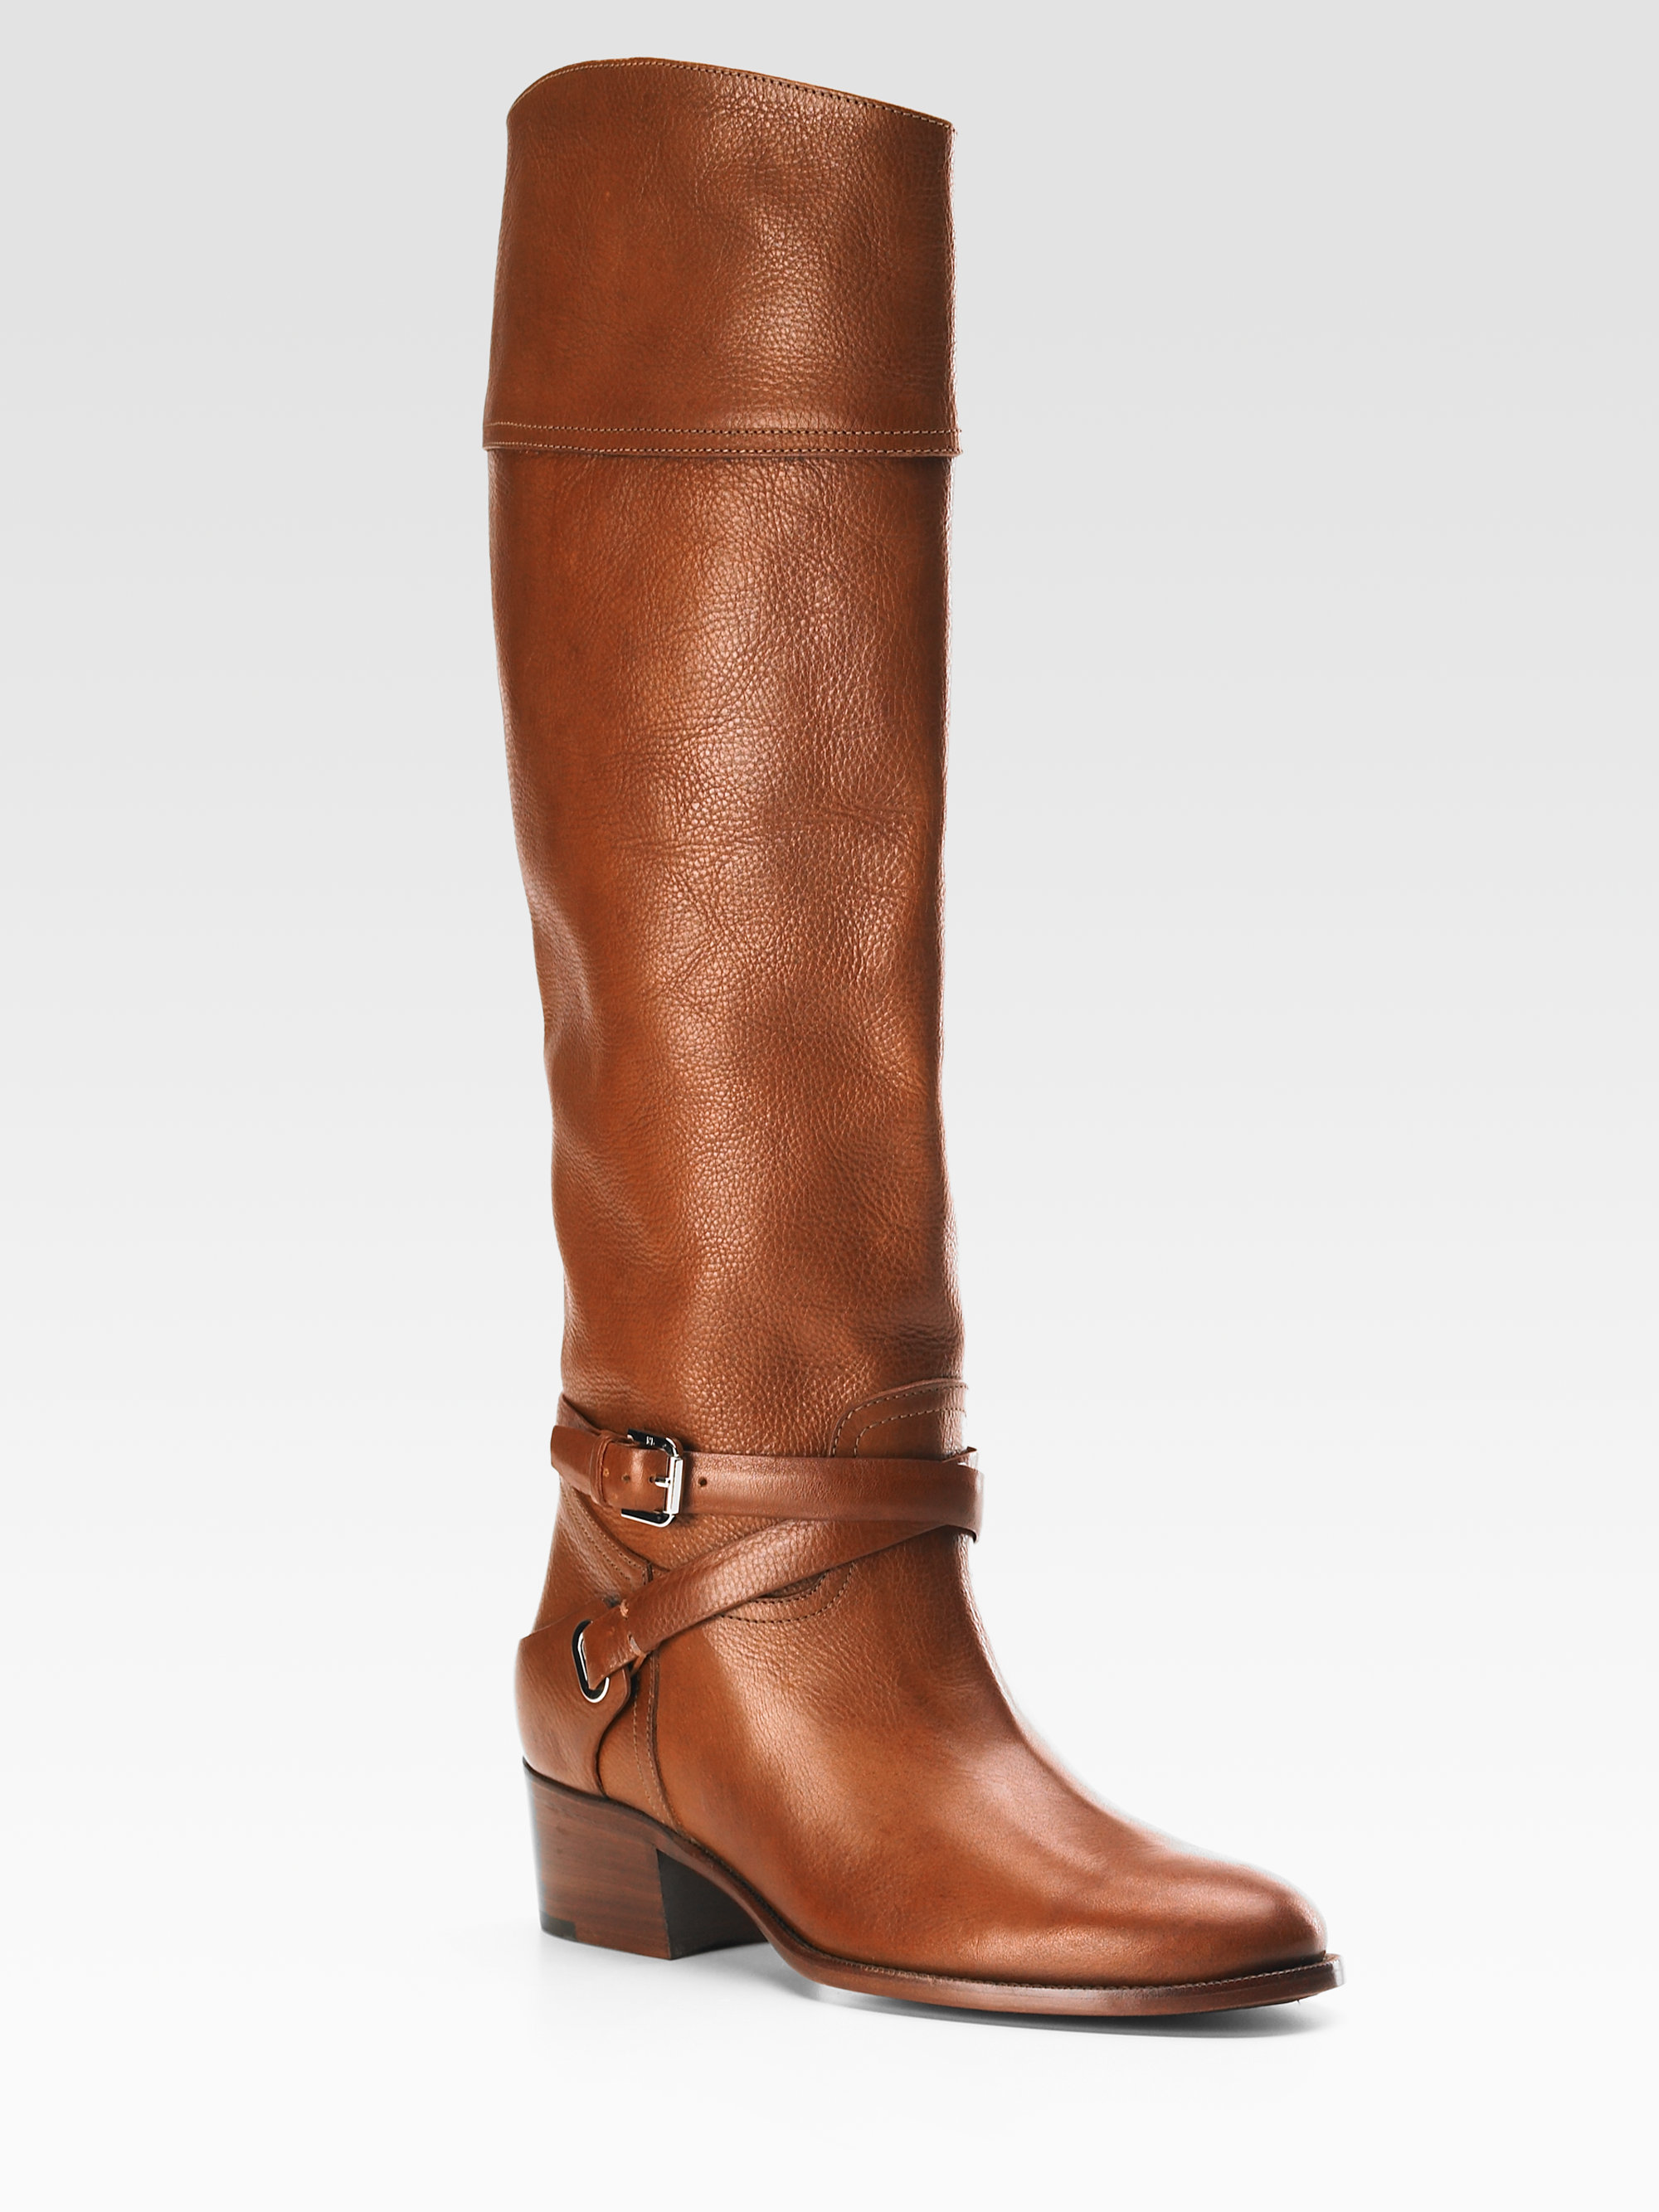 Ralph Lauren Collection Sahara Riding Boots in Brown | Lyst